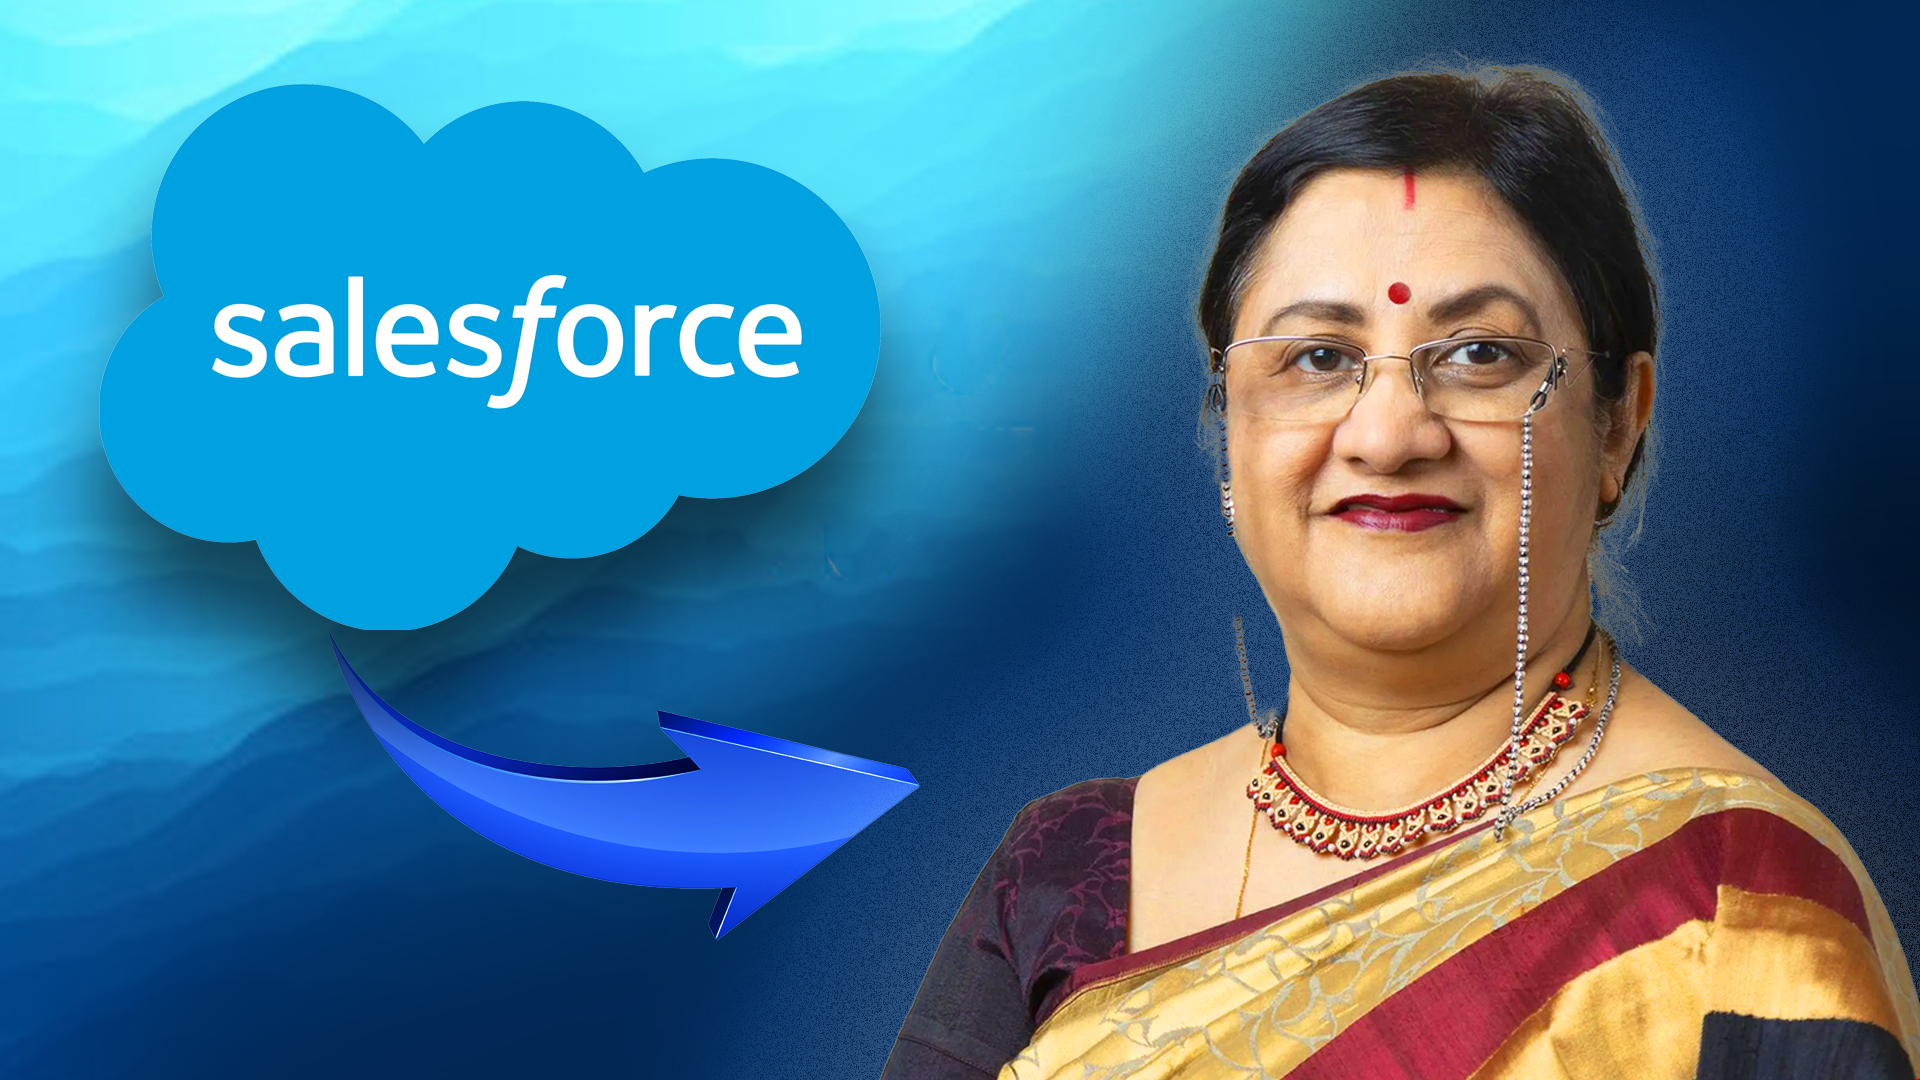 People thought Salesforce was a mistake: Arundhati Bhattacharya